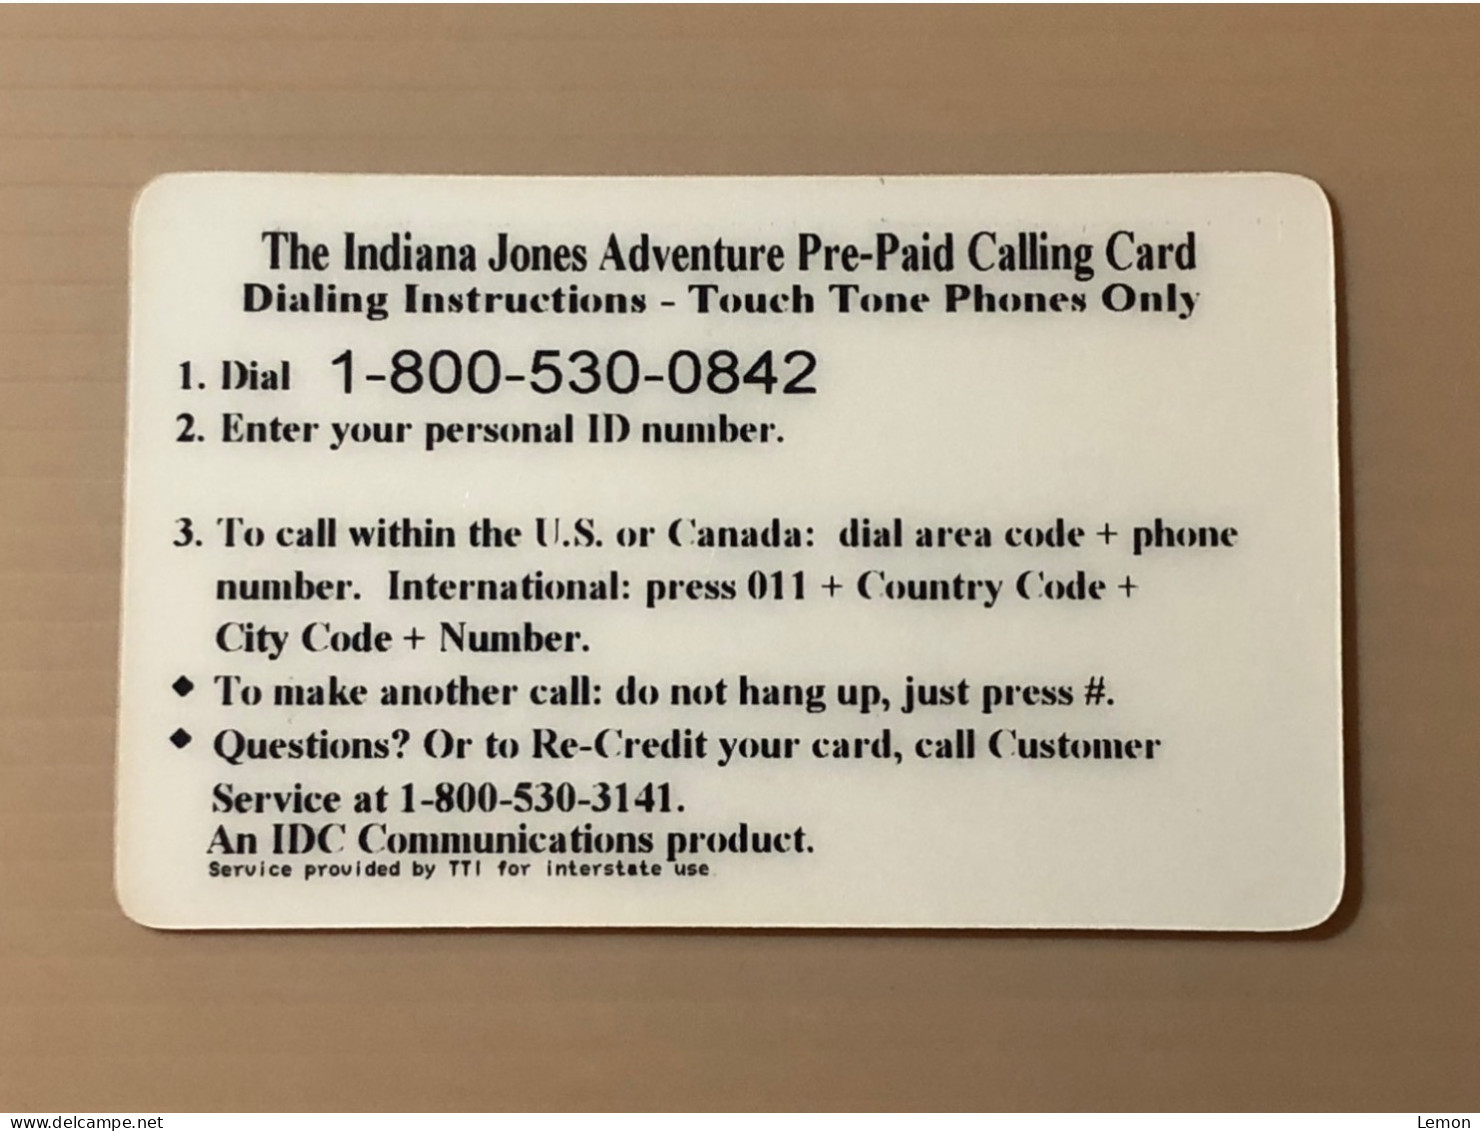 Mint USA UNITED STATES America Prepaid Telecard Phonecard, Indiana Jones To Disneyland SAMPLE CARD, Set Of 1 Mint Card - Collections